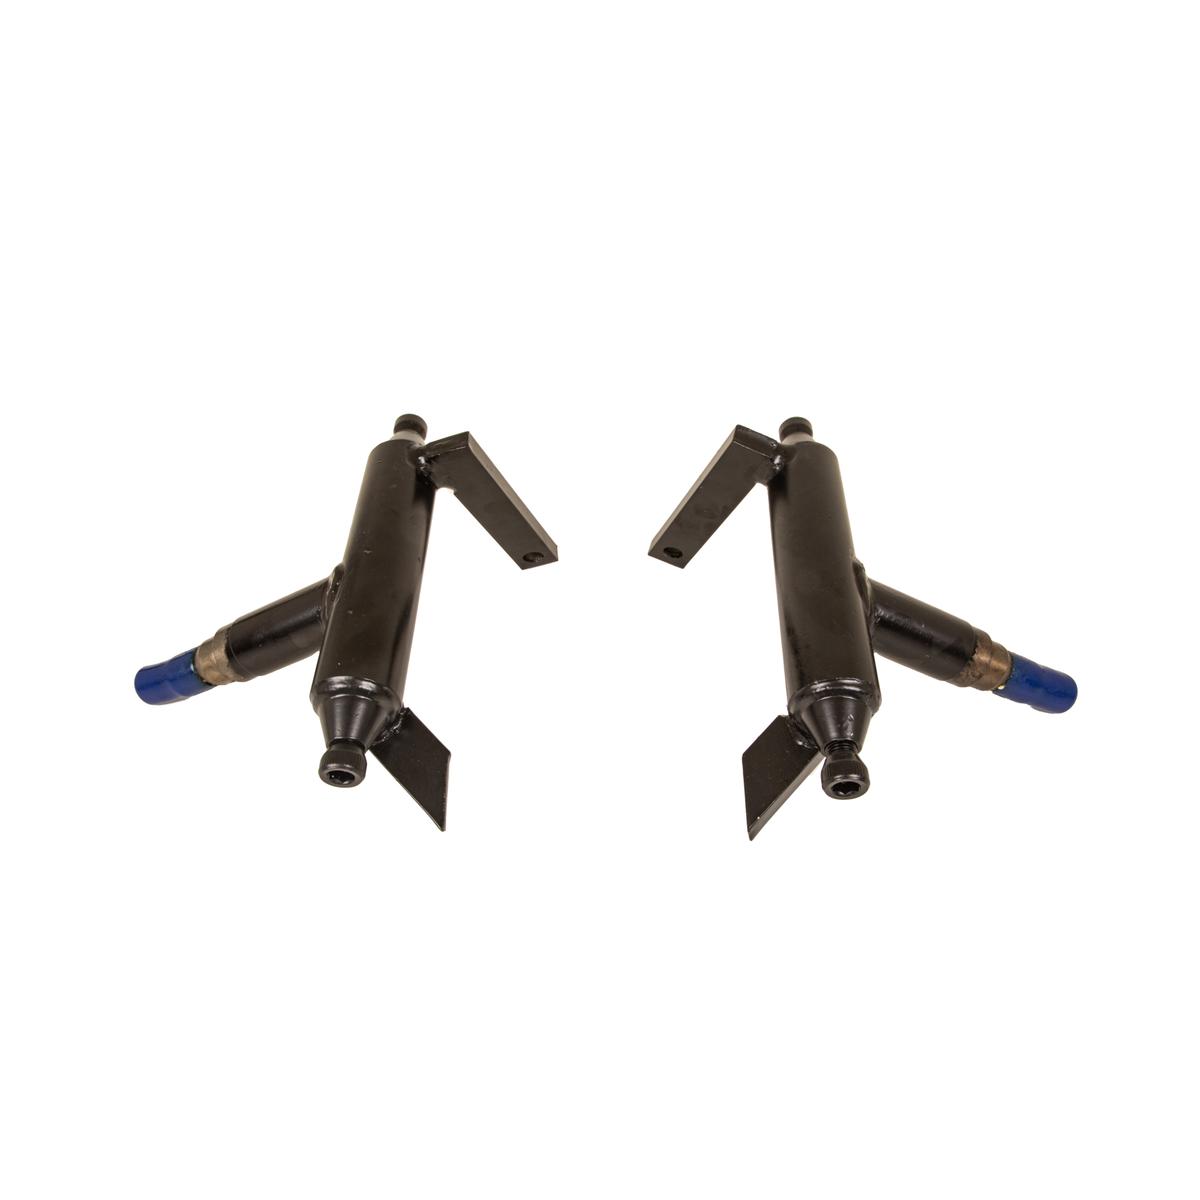 GTW Yamaha Drive/Drive2 4” Double A-Arm Front Lift Kit